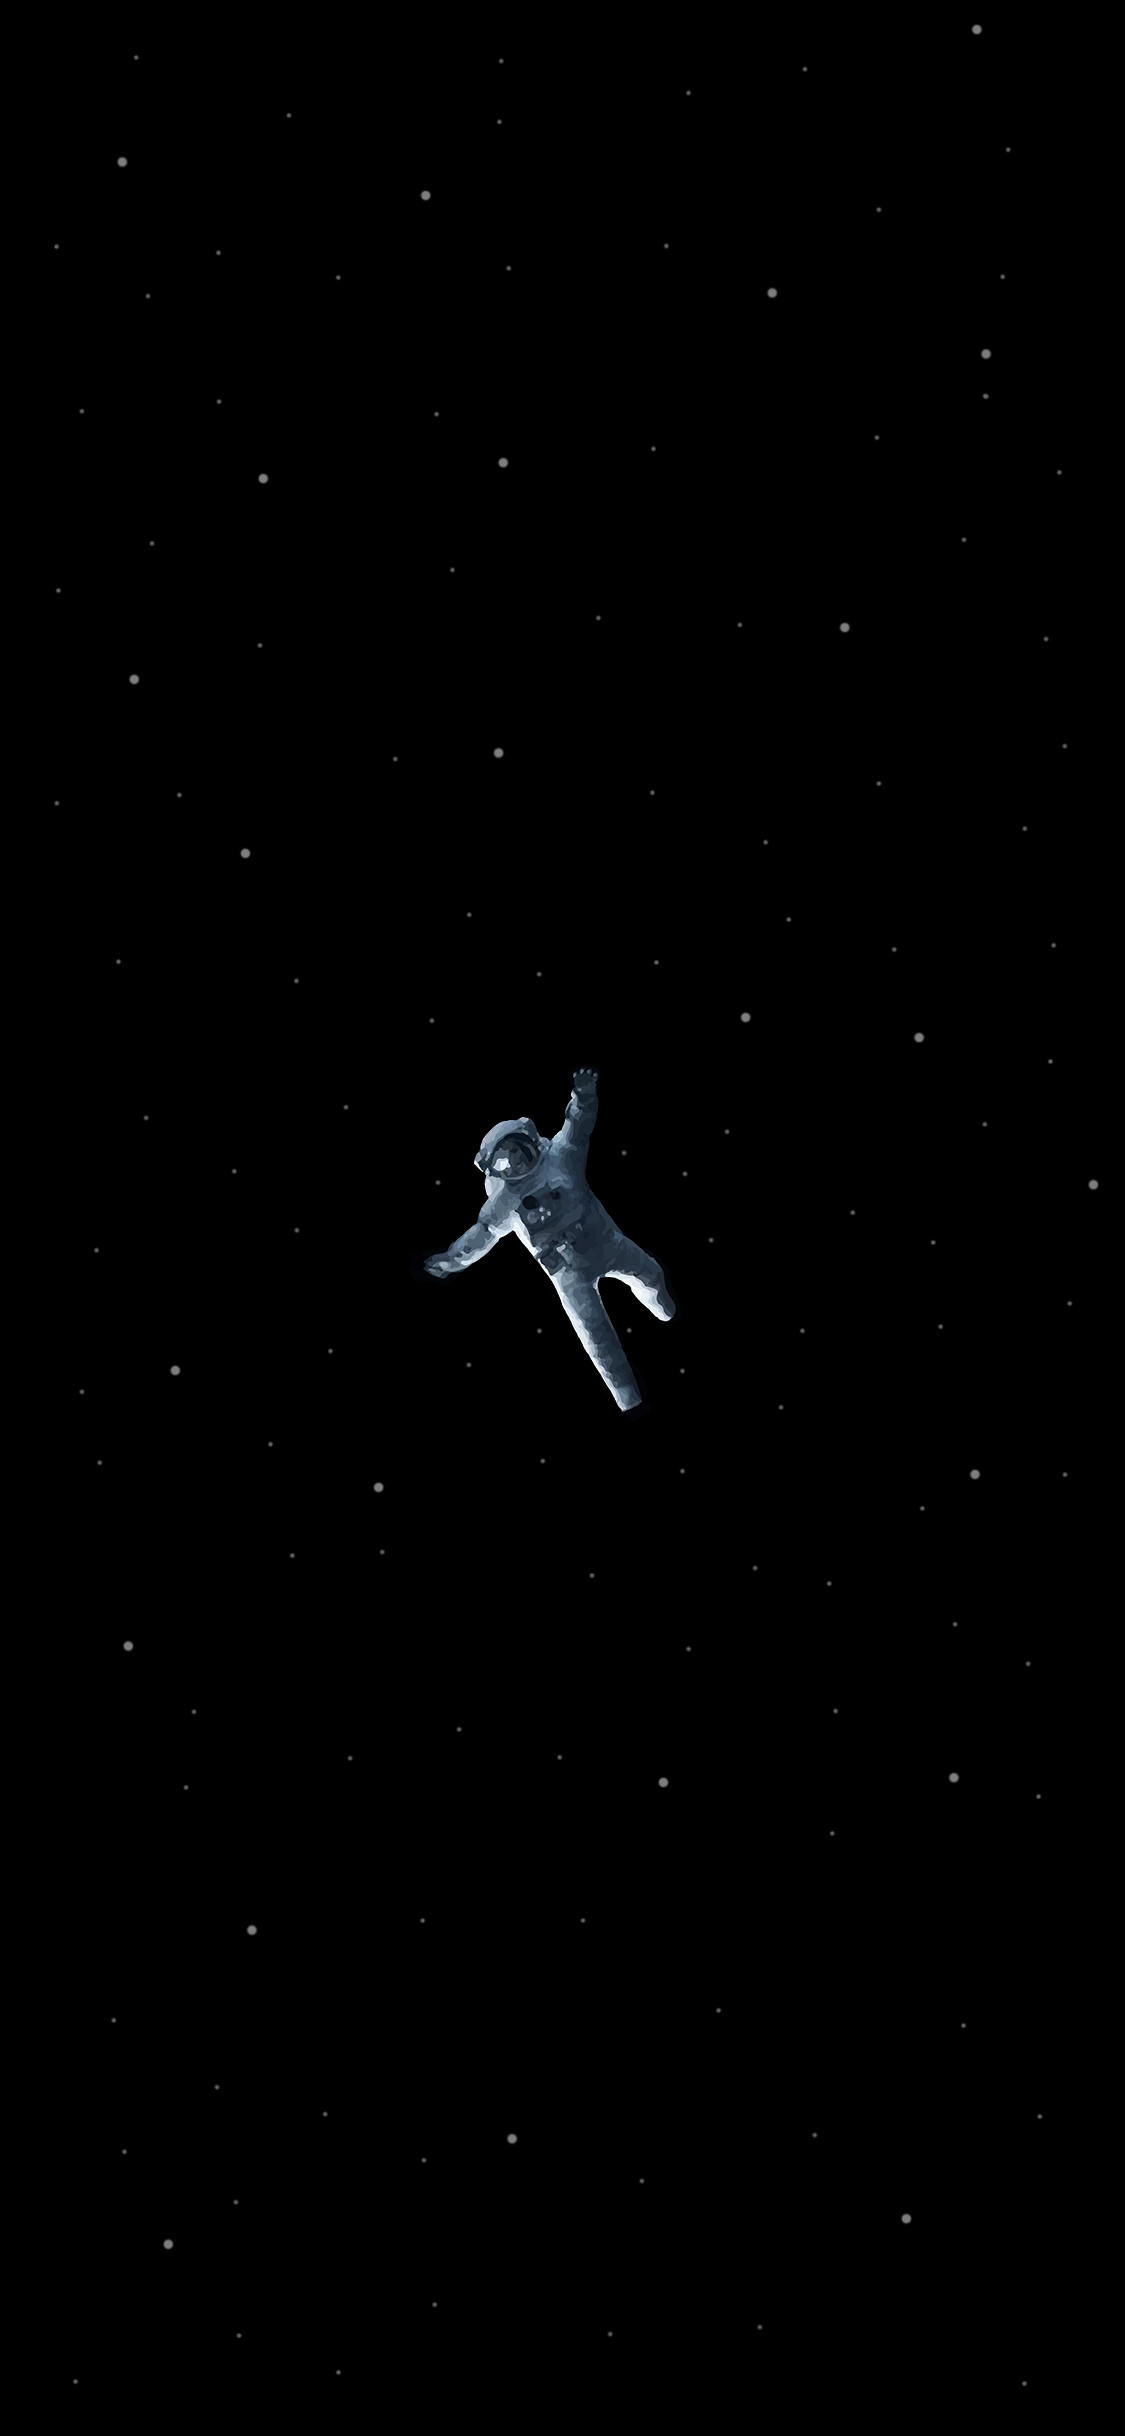 Spaceman Wallpaper Image In Collection